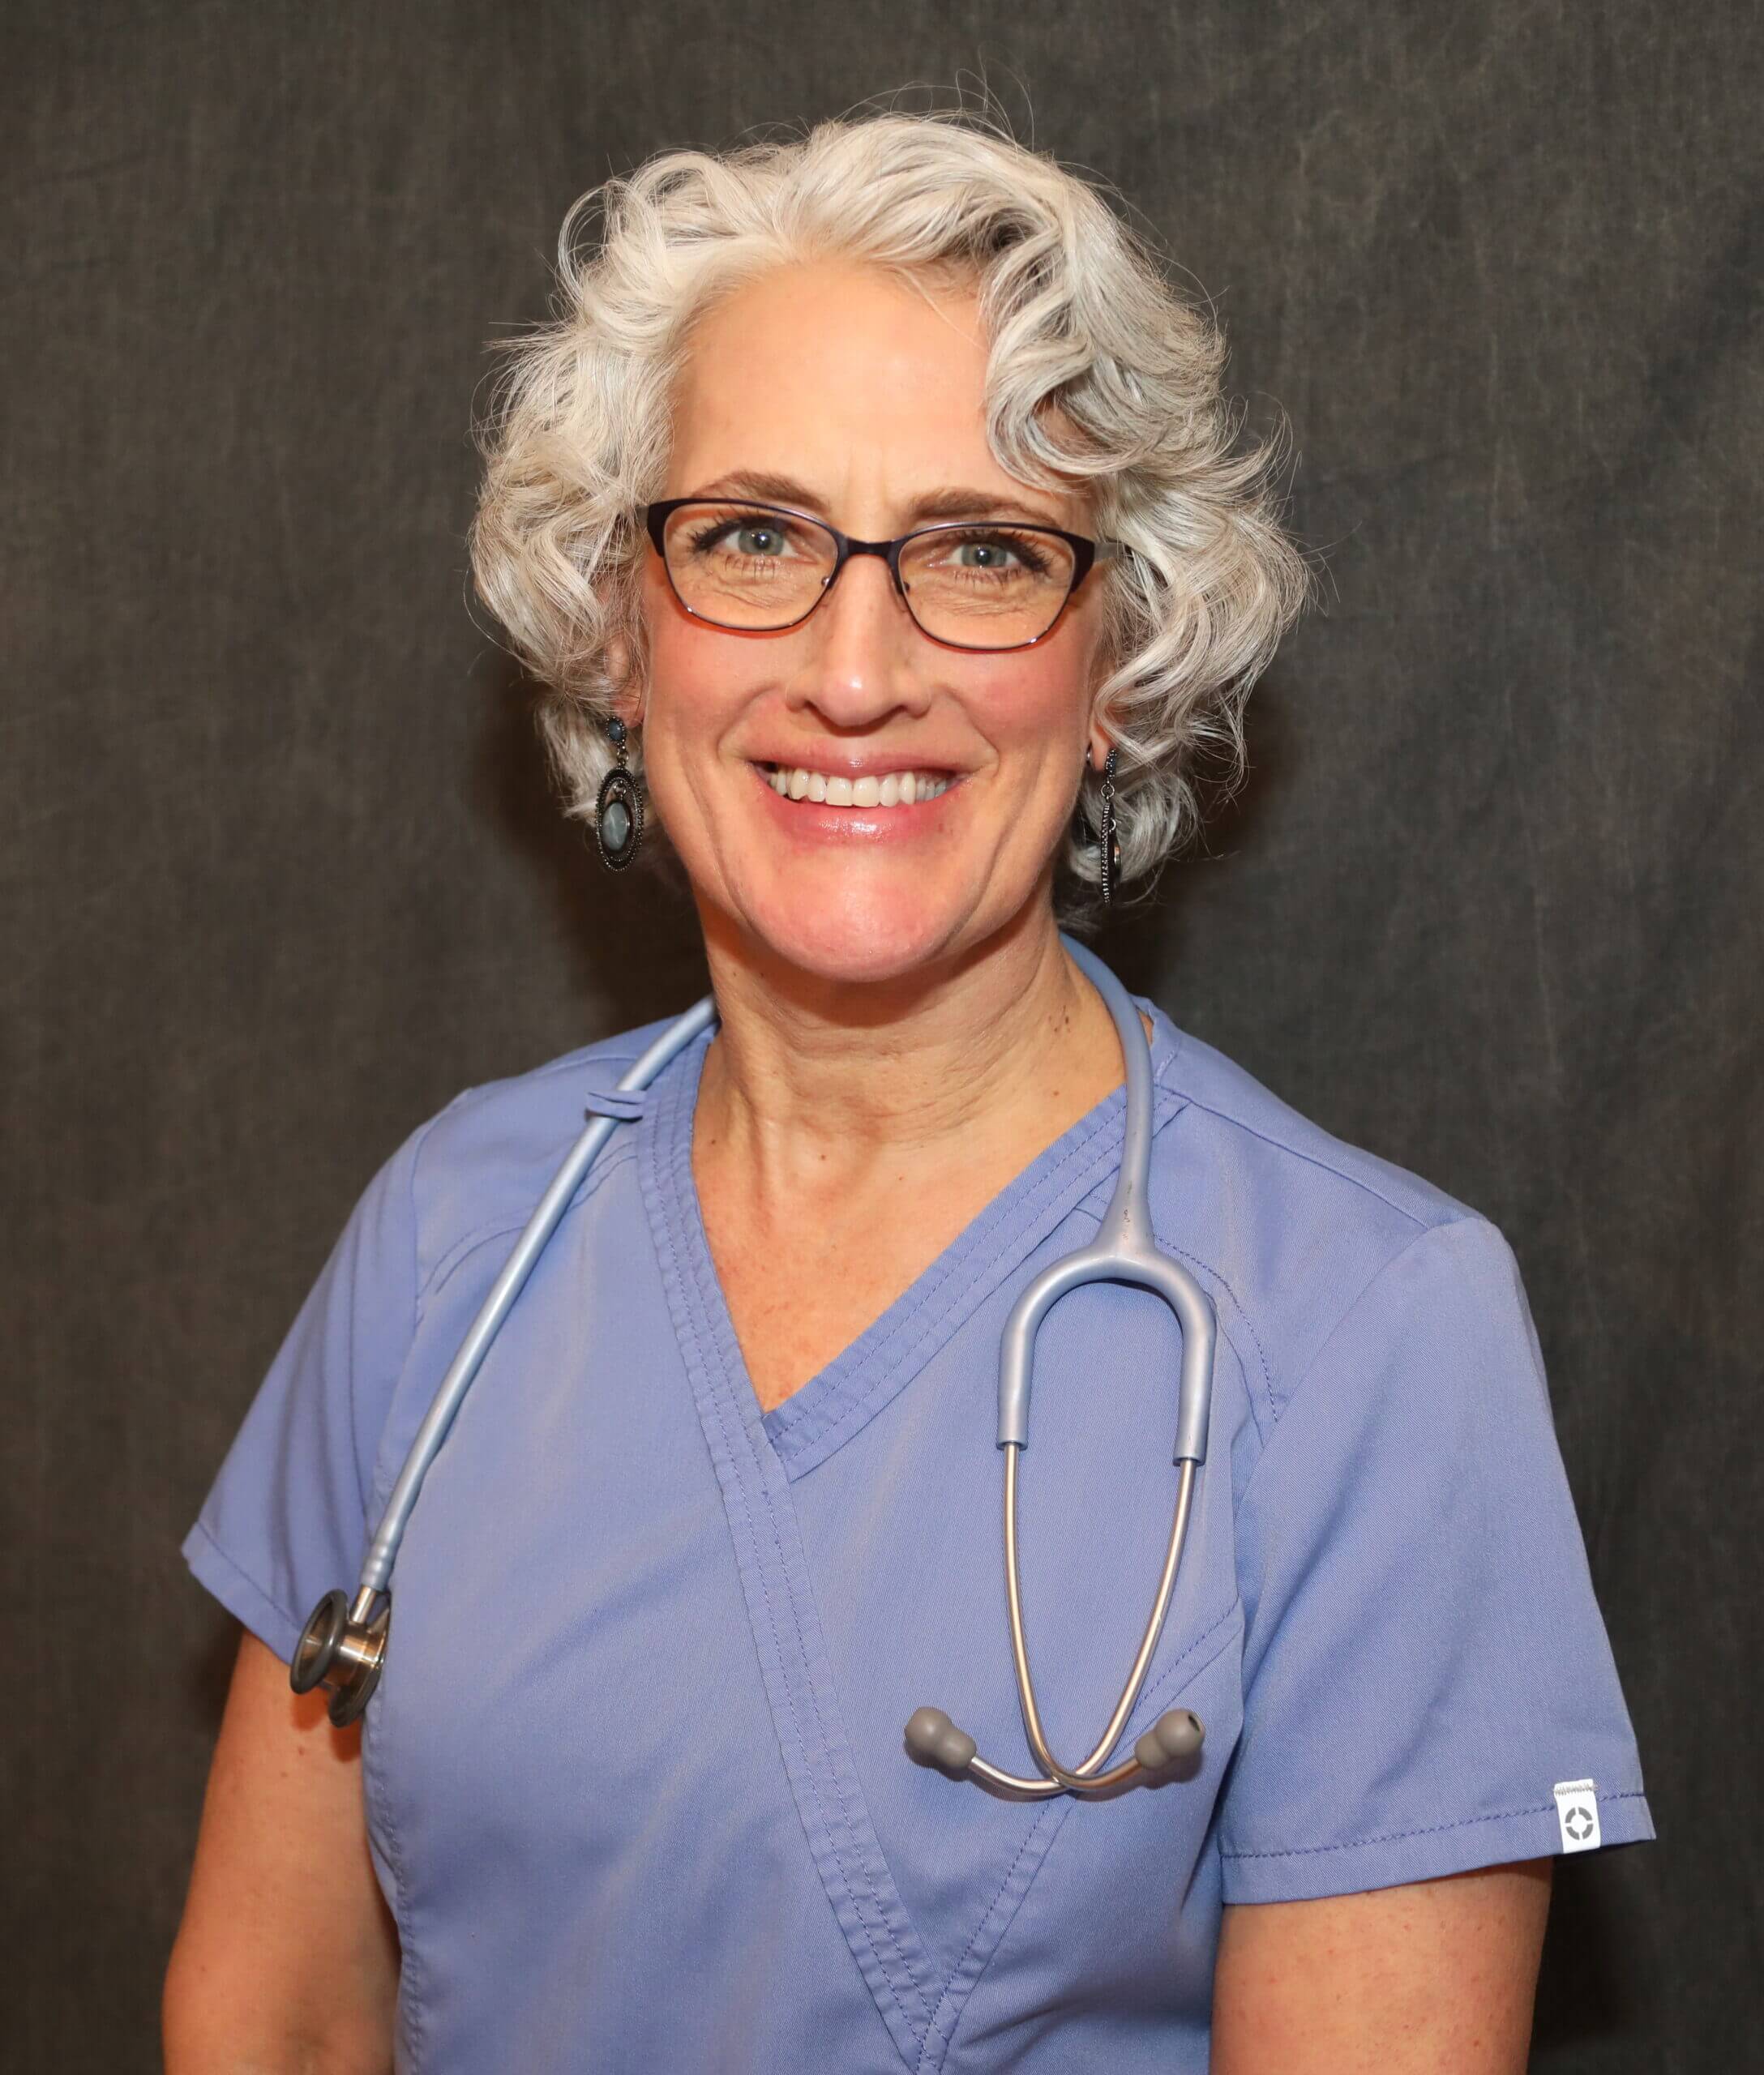 A woman with glasses and a stethoscope around her neck.